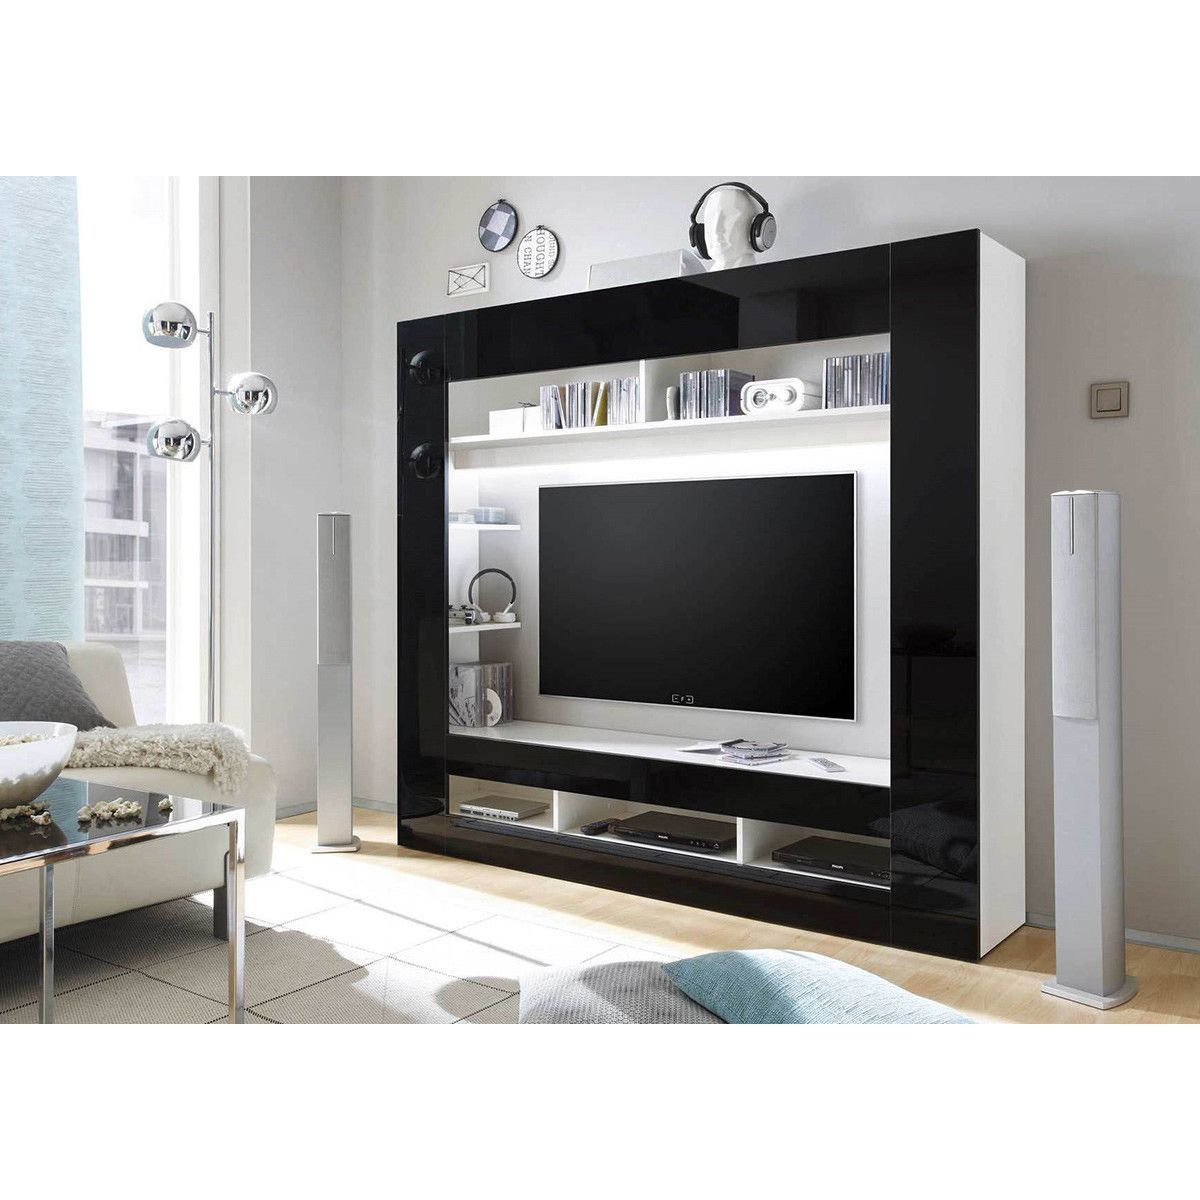 Customer Image Zoomed | Home, Cool Tv Stands Within Funky Tv Units (View 2 of 15)